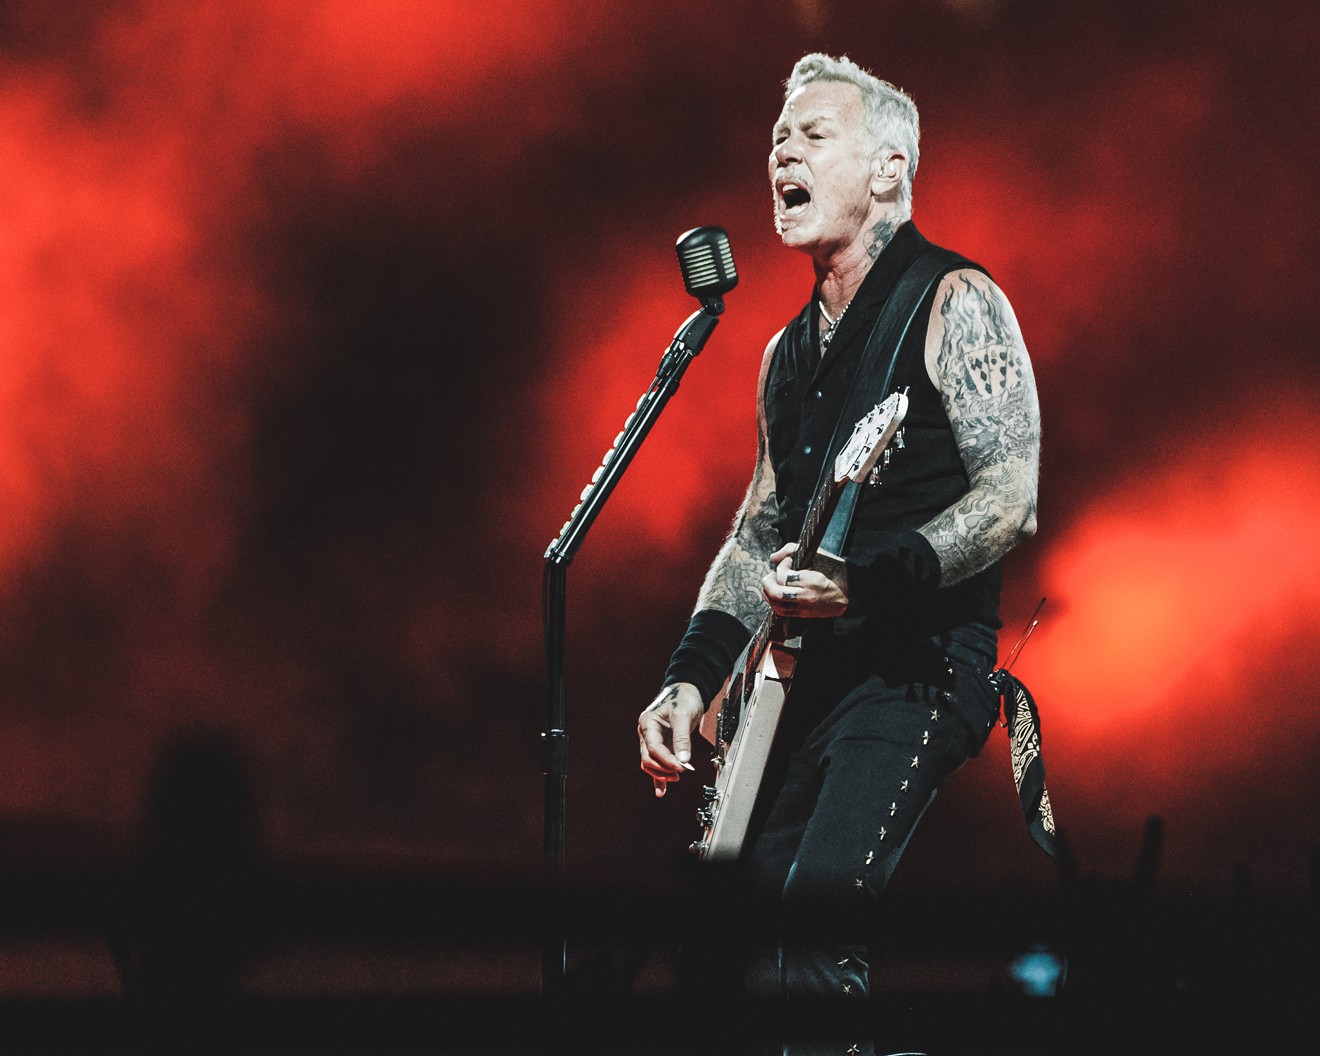 James Hetfield giving Fuel, Fire, and all that was desired as Metallica played Friday night with Pantera.